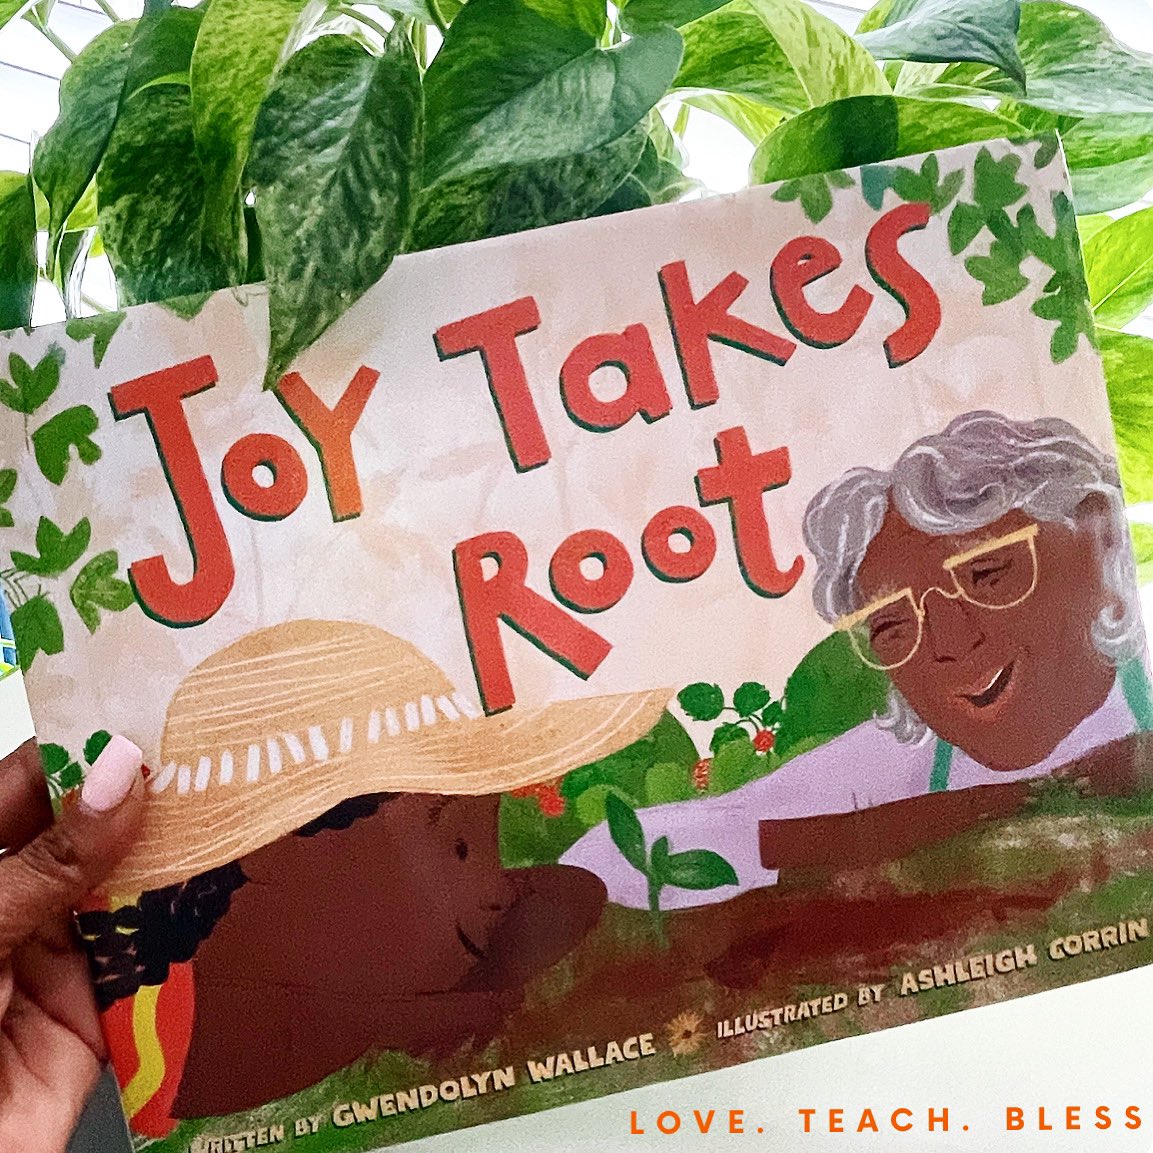 “…take a few deep breaths. During these breaths, it’s important to think about the ancestors who came before us and the ways they took care of this same soul.” Joy Takes Root, Beautiful all the way around. 🪴 #childrensbooks #books #booksforkids #blackauthors